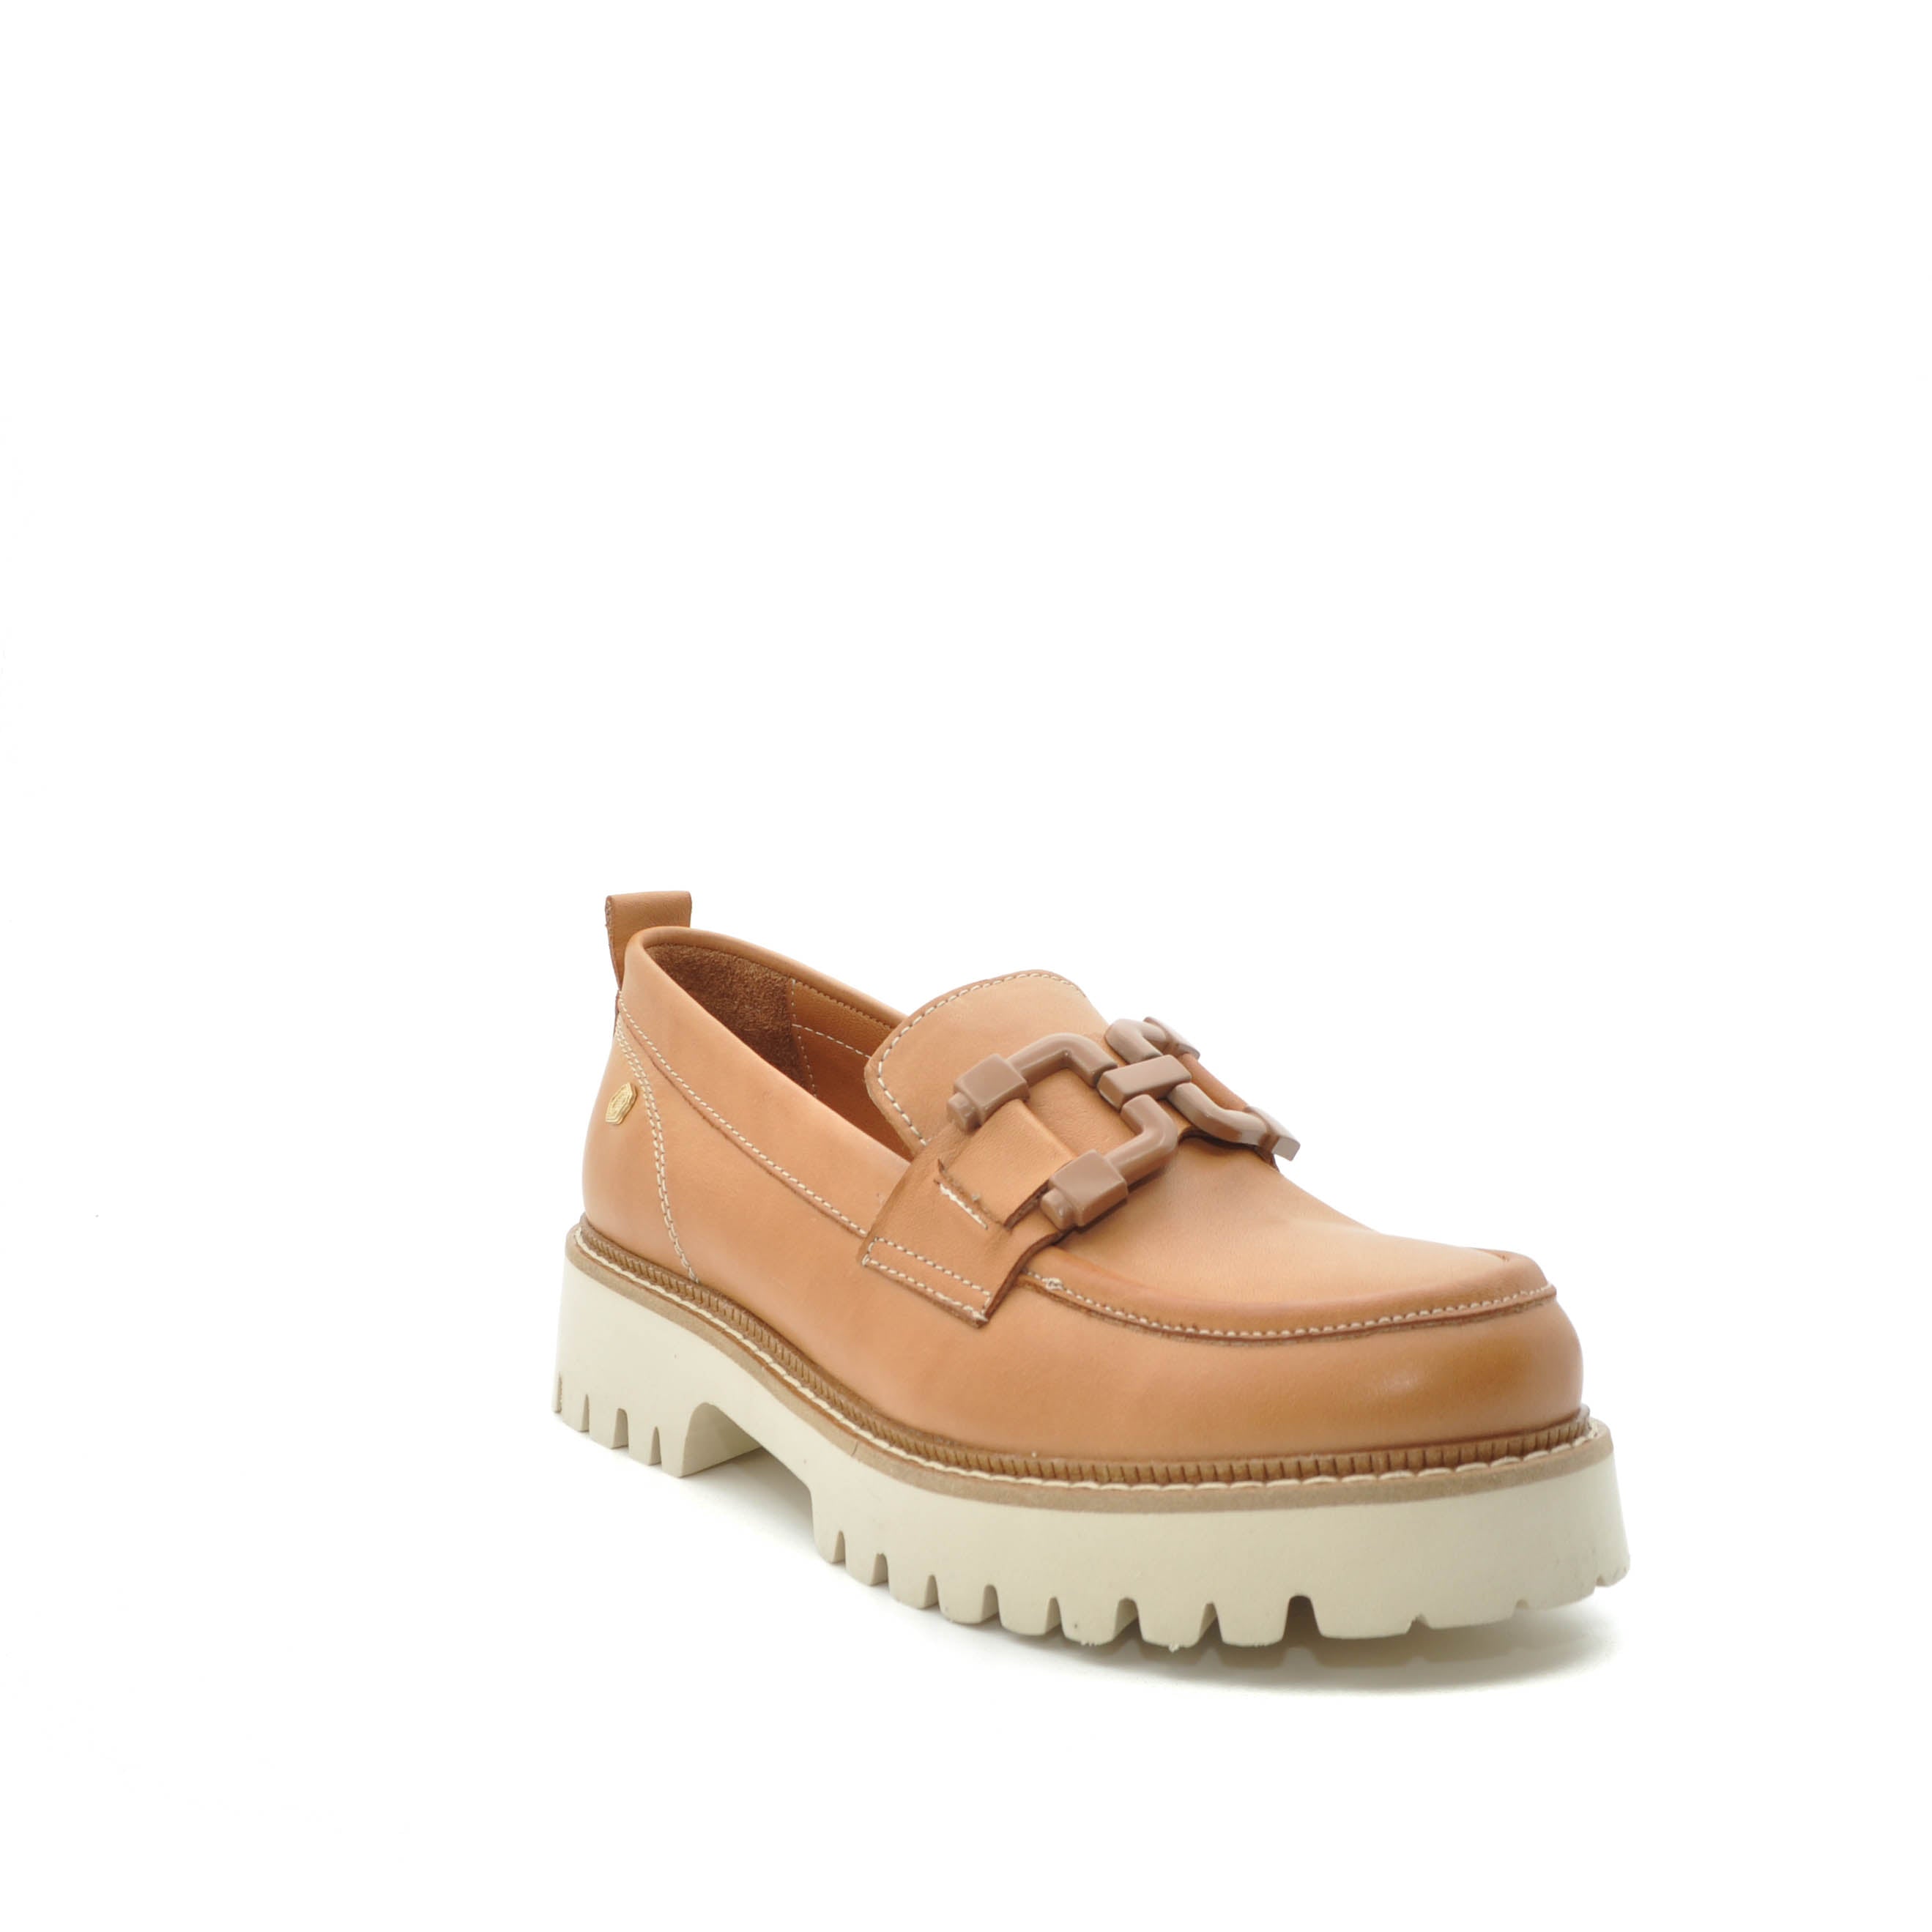 tan loafers